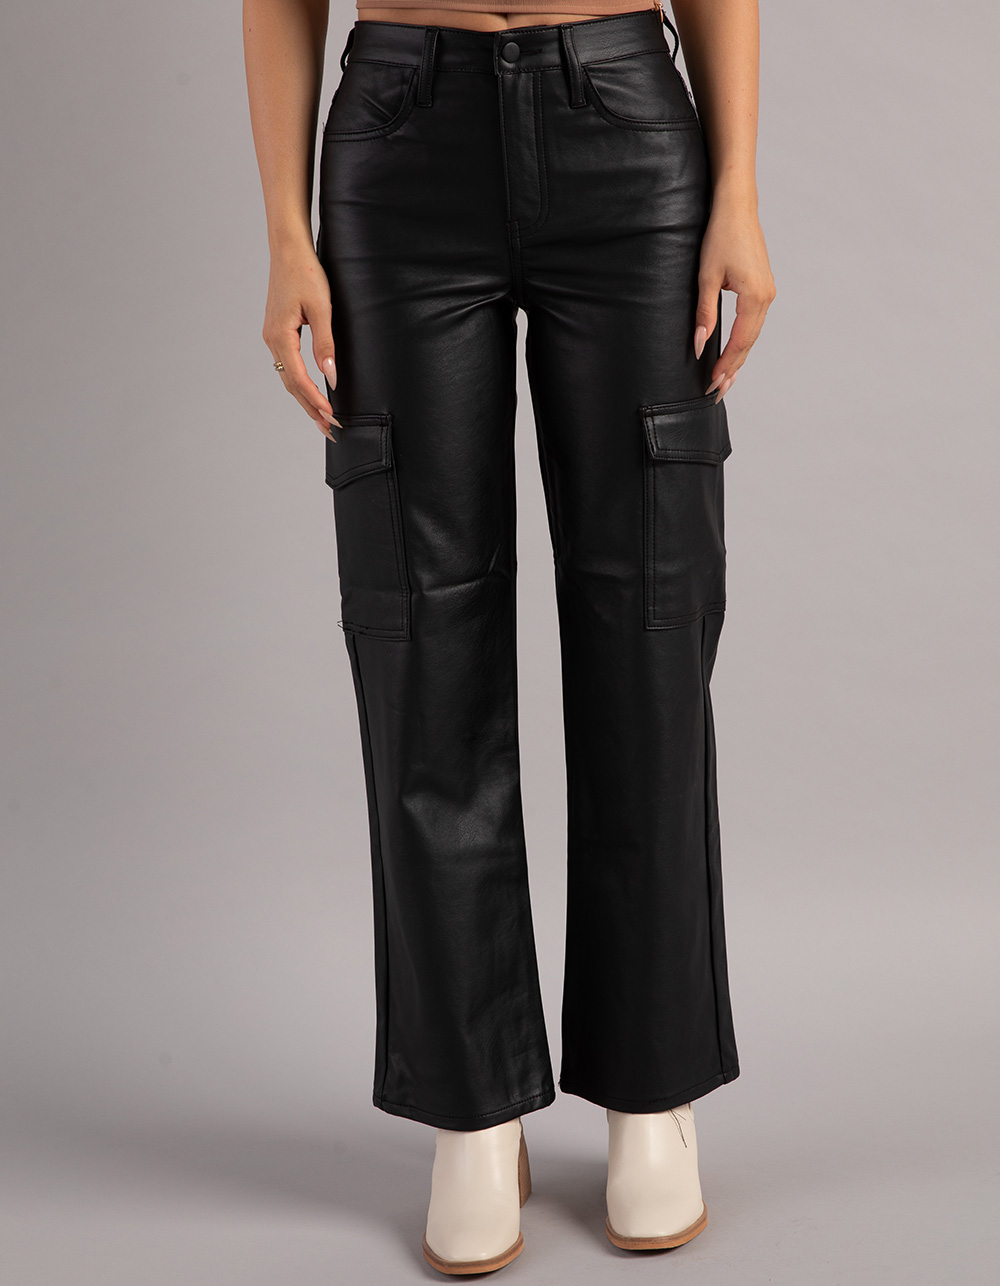 WEST OF MELROSE Faux Leather Womens Cargo Pants - BLACK | Tillys